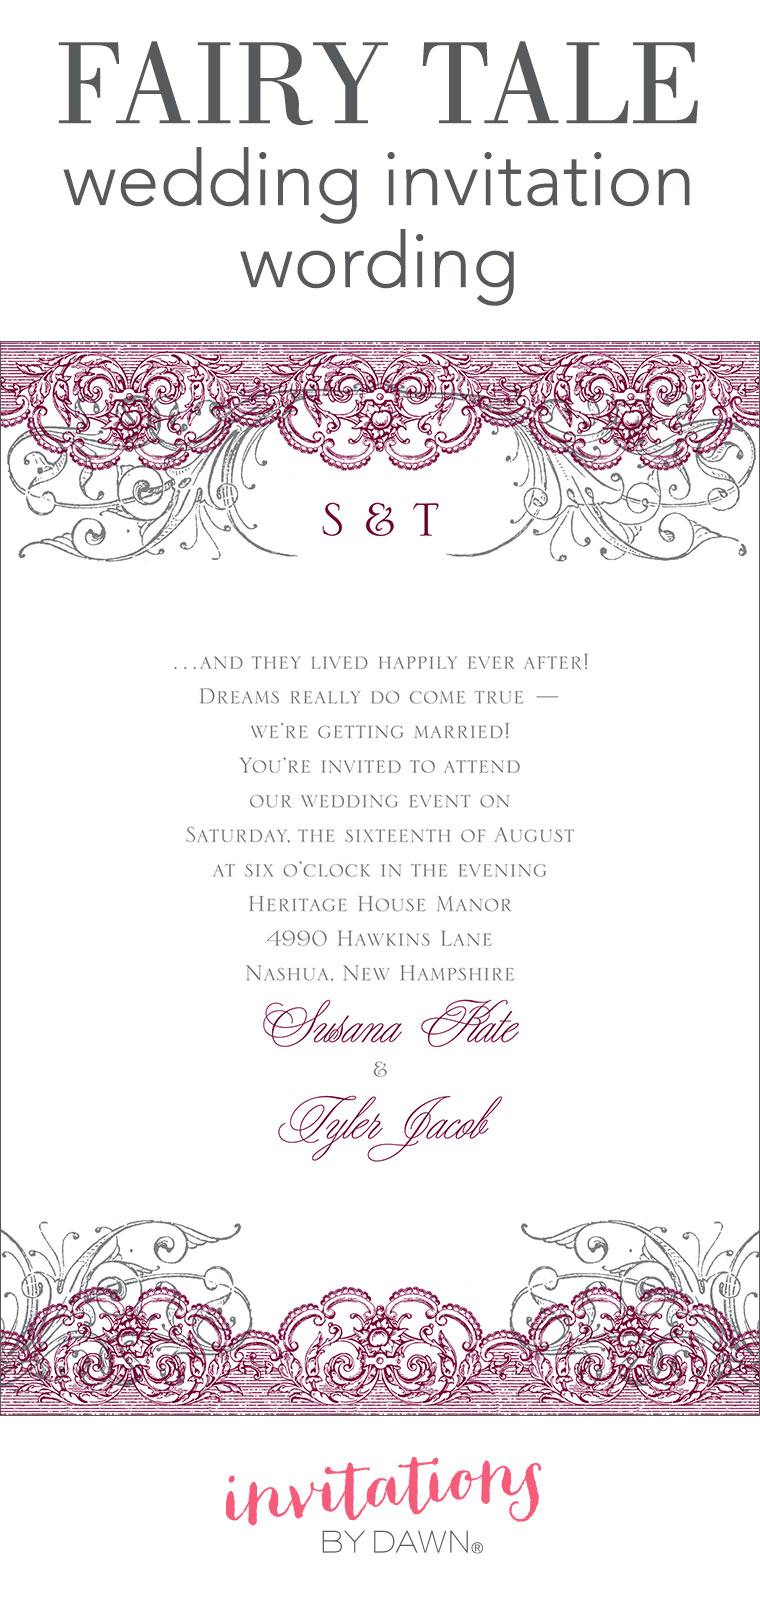 What To Write On A Wedding Invitation Fairy Tale Wedding Invitation Wording Invitations Dawn